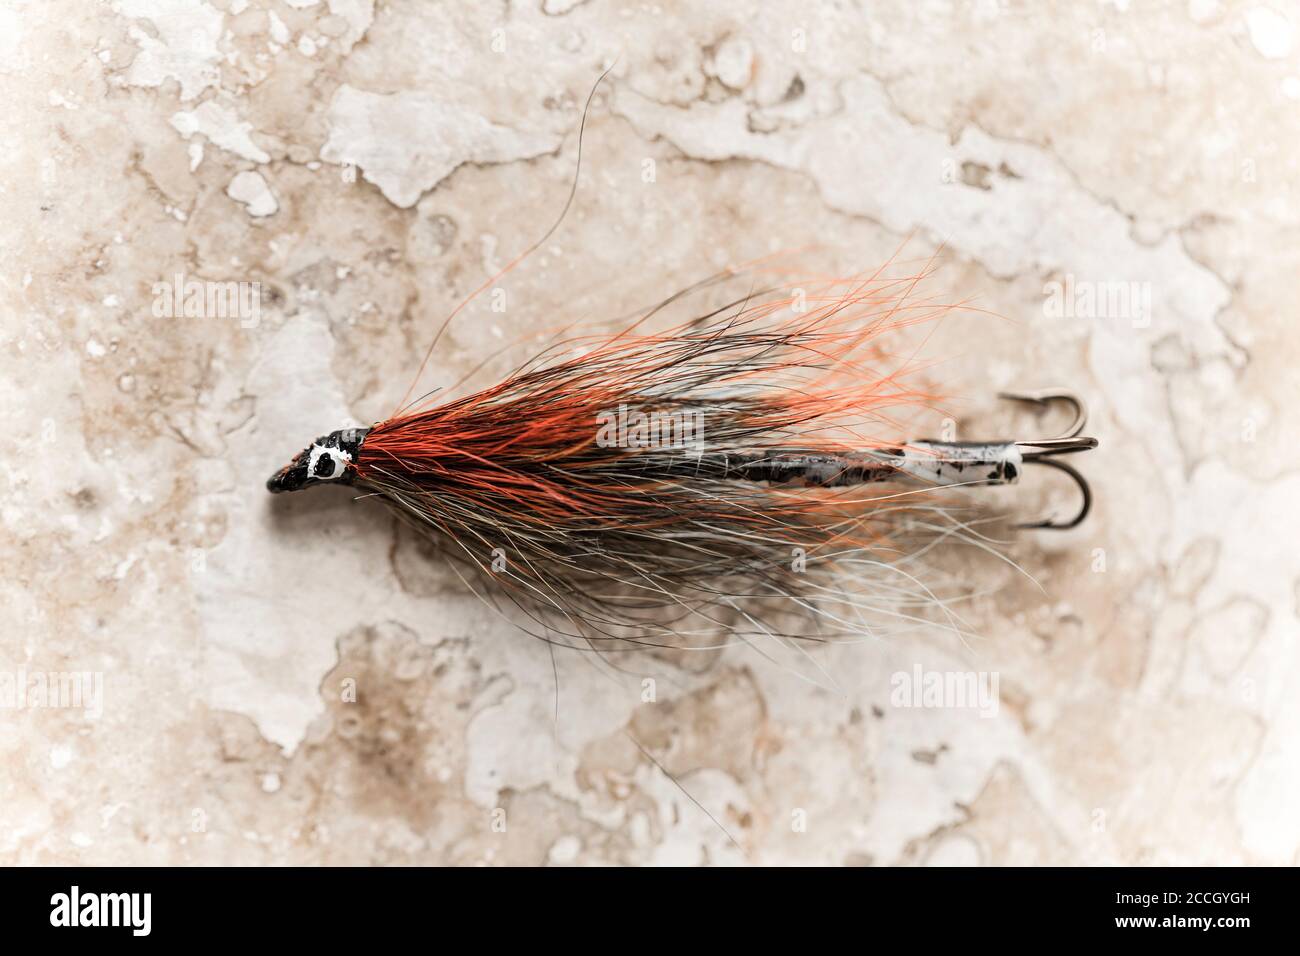 https://c8.alamy.com/comp/2CCGYGH/an-old-salmon-fly-possibly-homemade-from-a-collection-of-vintage-fishing-tackle-desaturated-colours-on-a-light-stone-background-dorset-england-uk-2CCGYGH.jpg